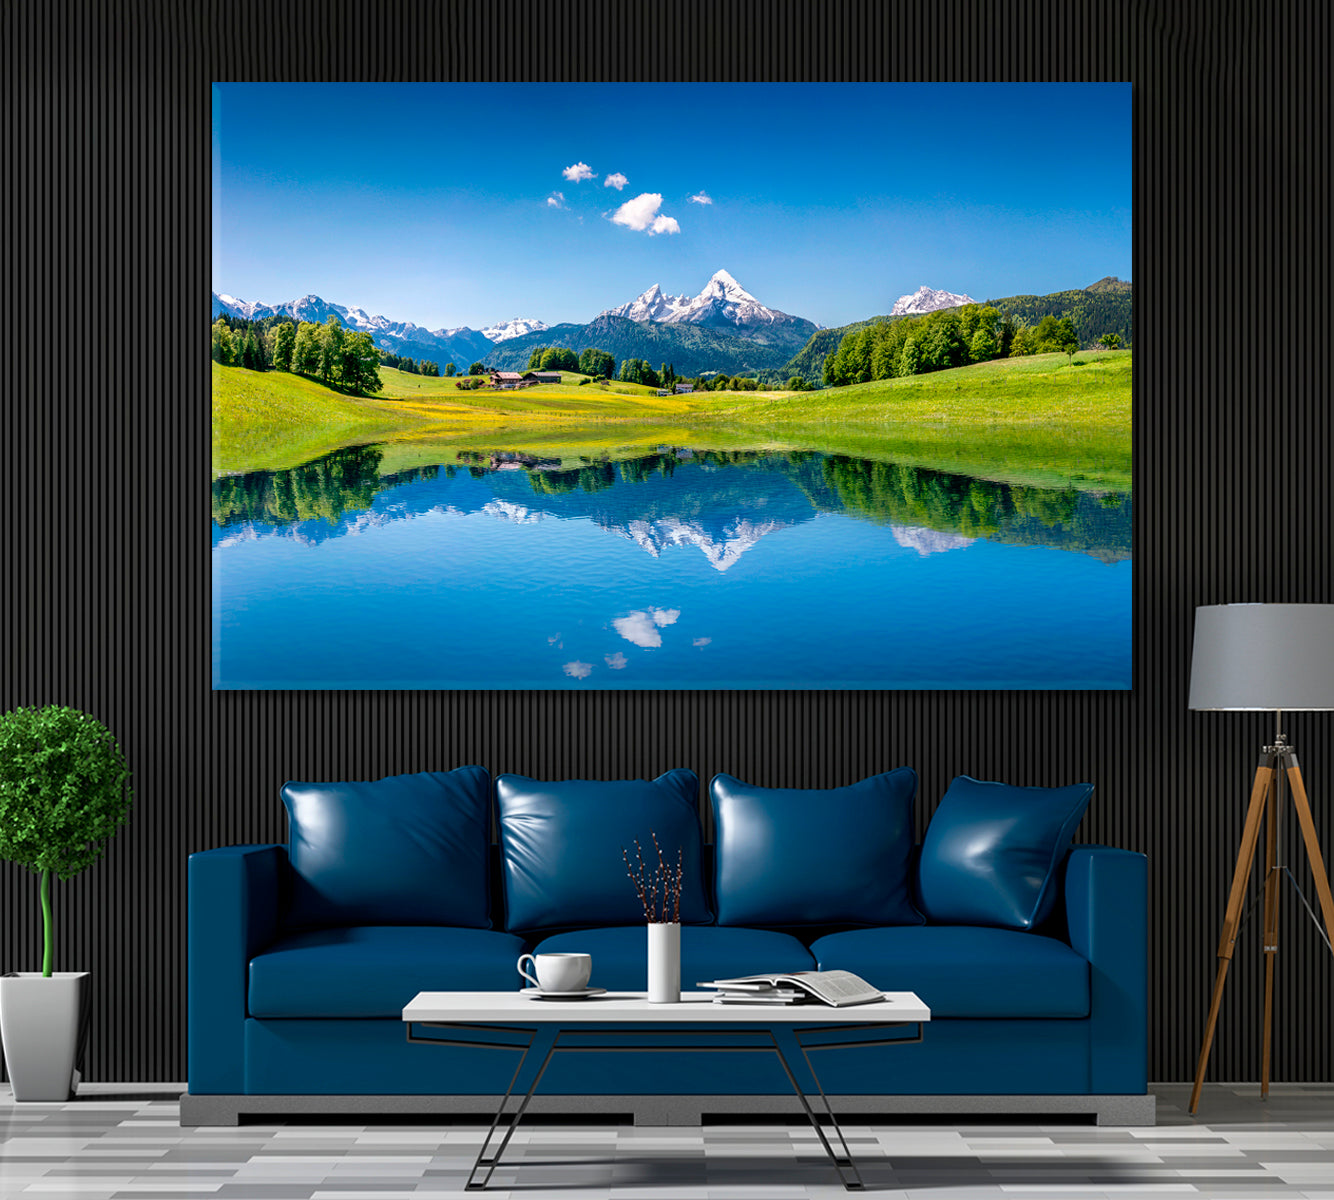 Summer Landscape of Alps Canvas Print ArtLexy 1 Panel 24"x16" inches 